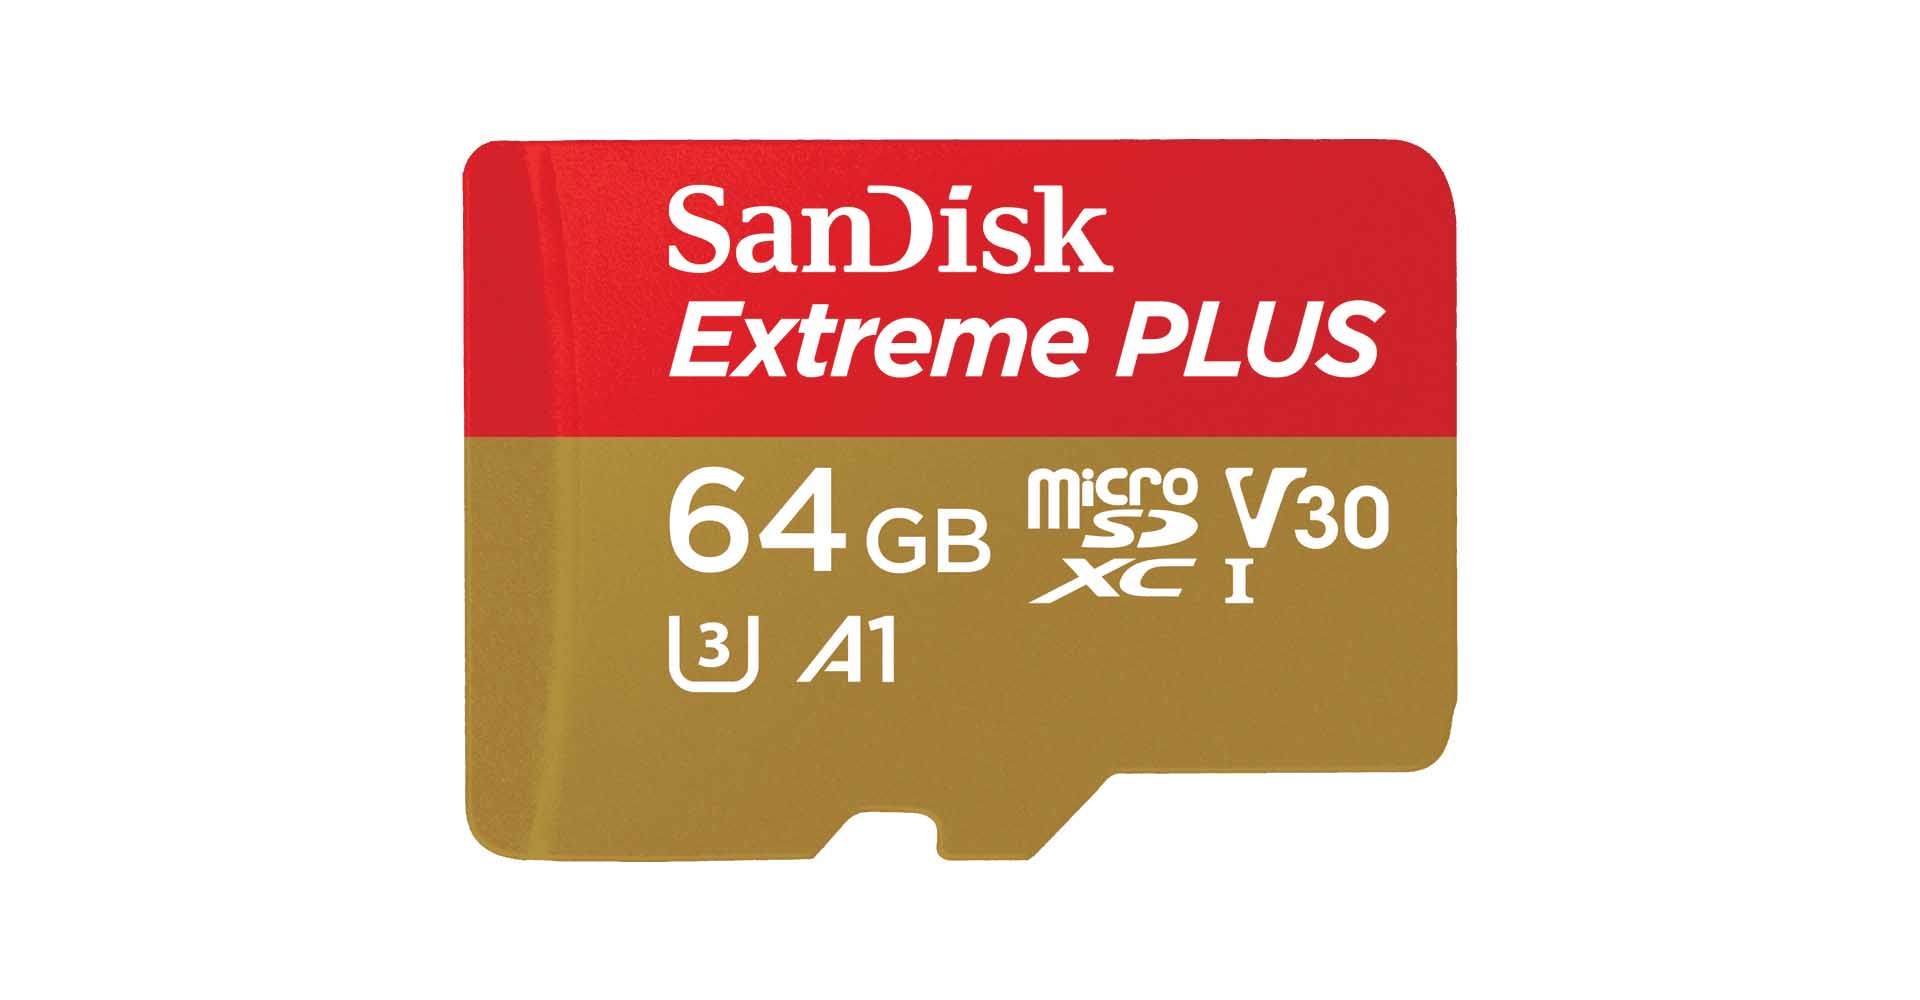 Best memory card for GoPro: Sandisk Extreme Plus